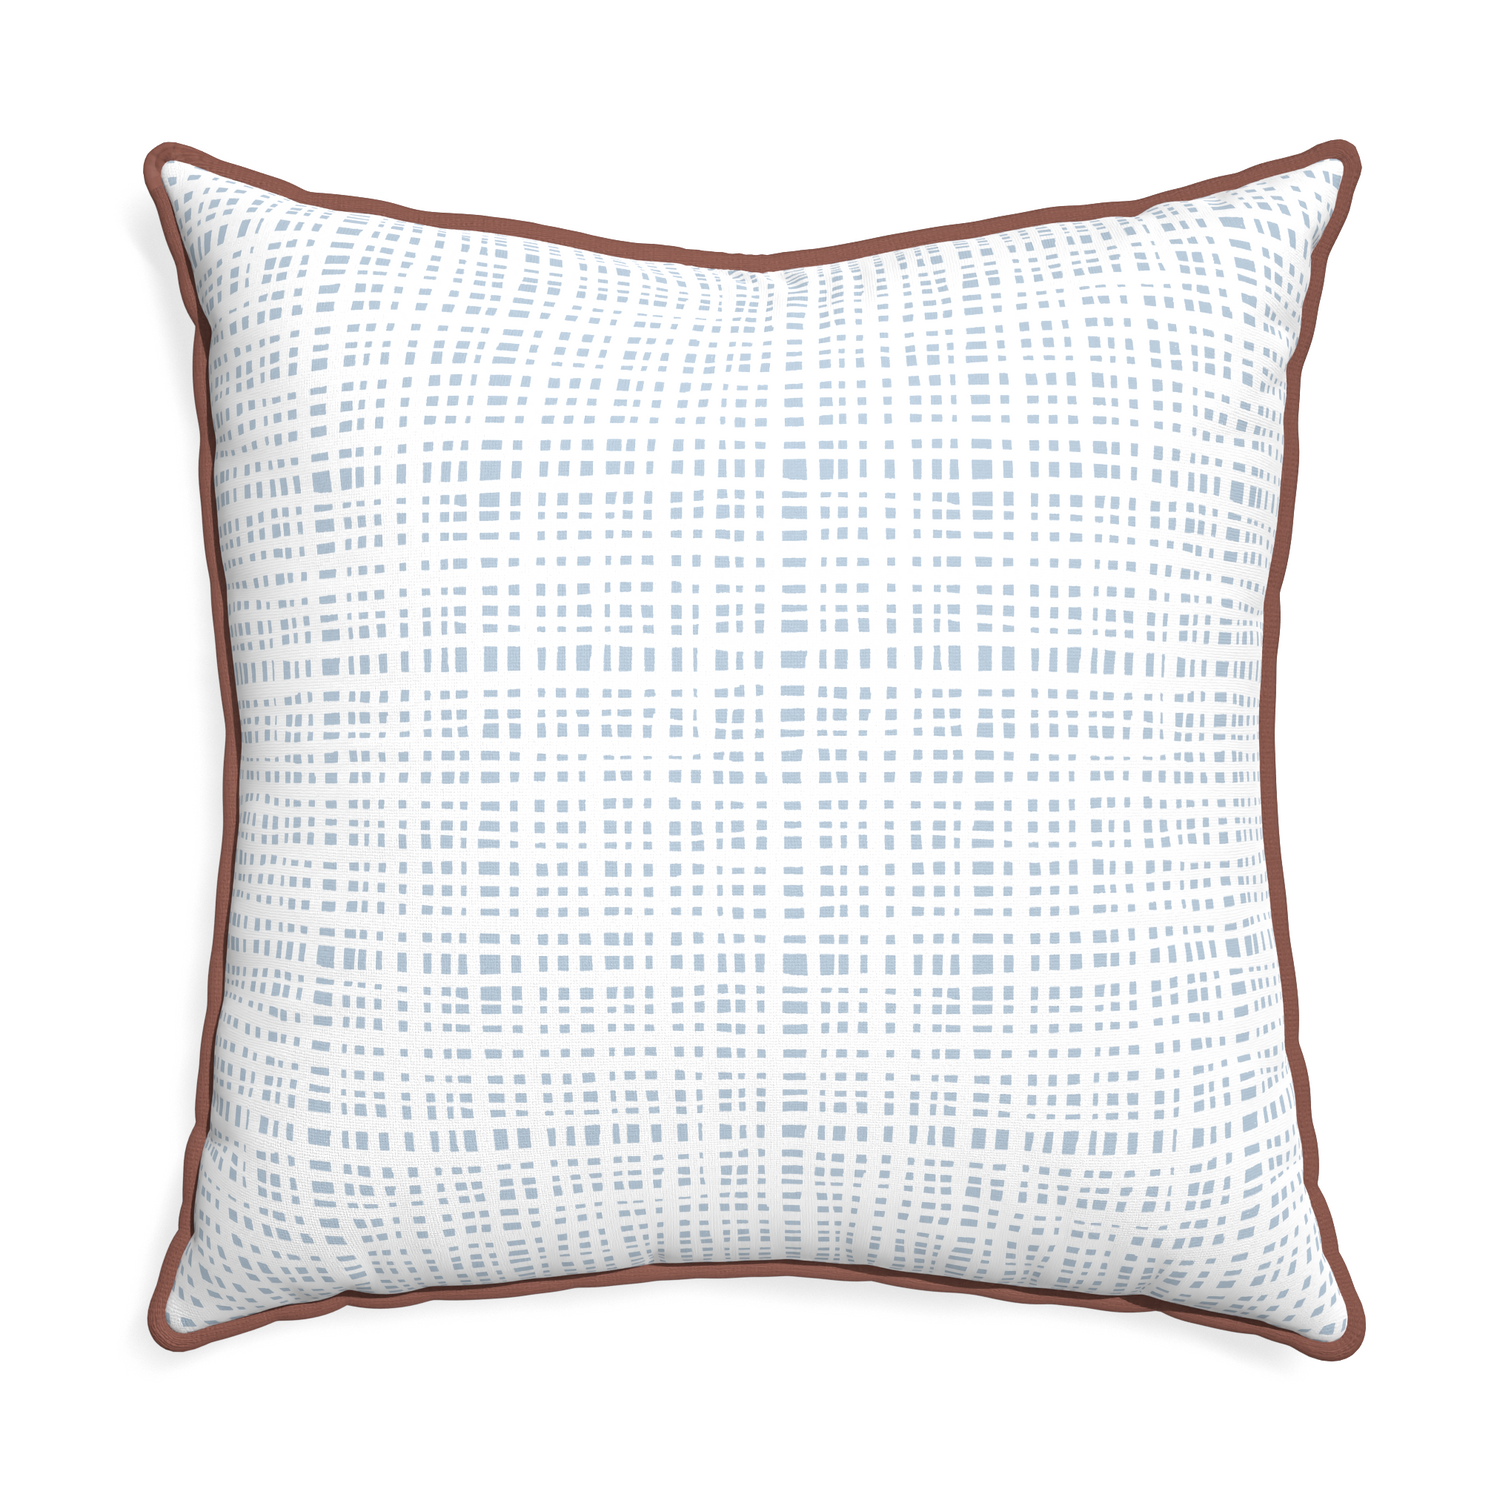 Euro-sham ginger sky custom pillow with w piping on white background